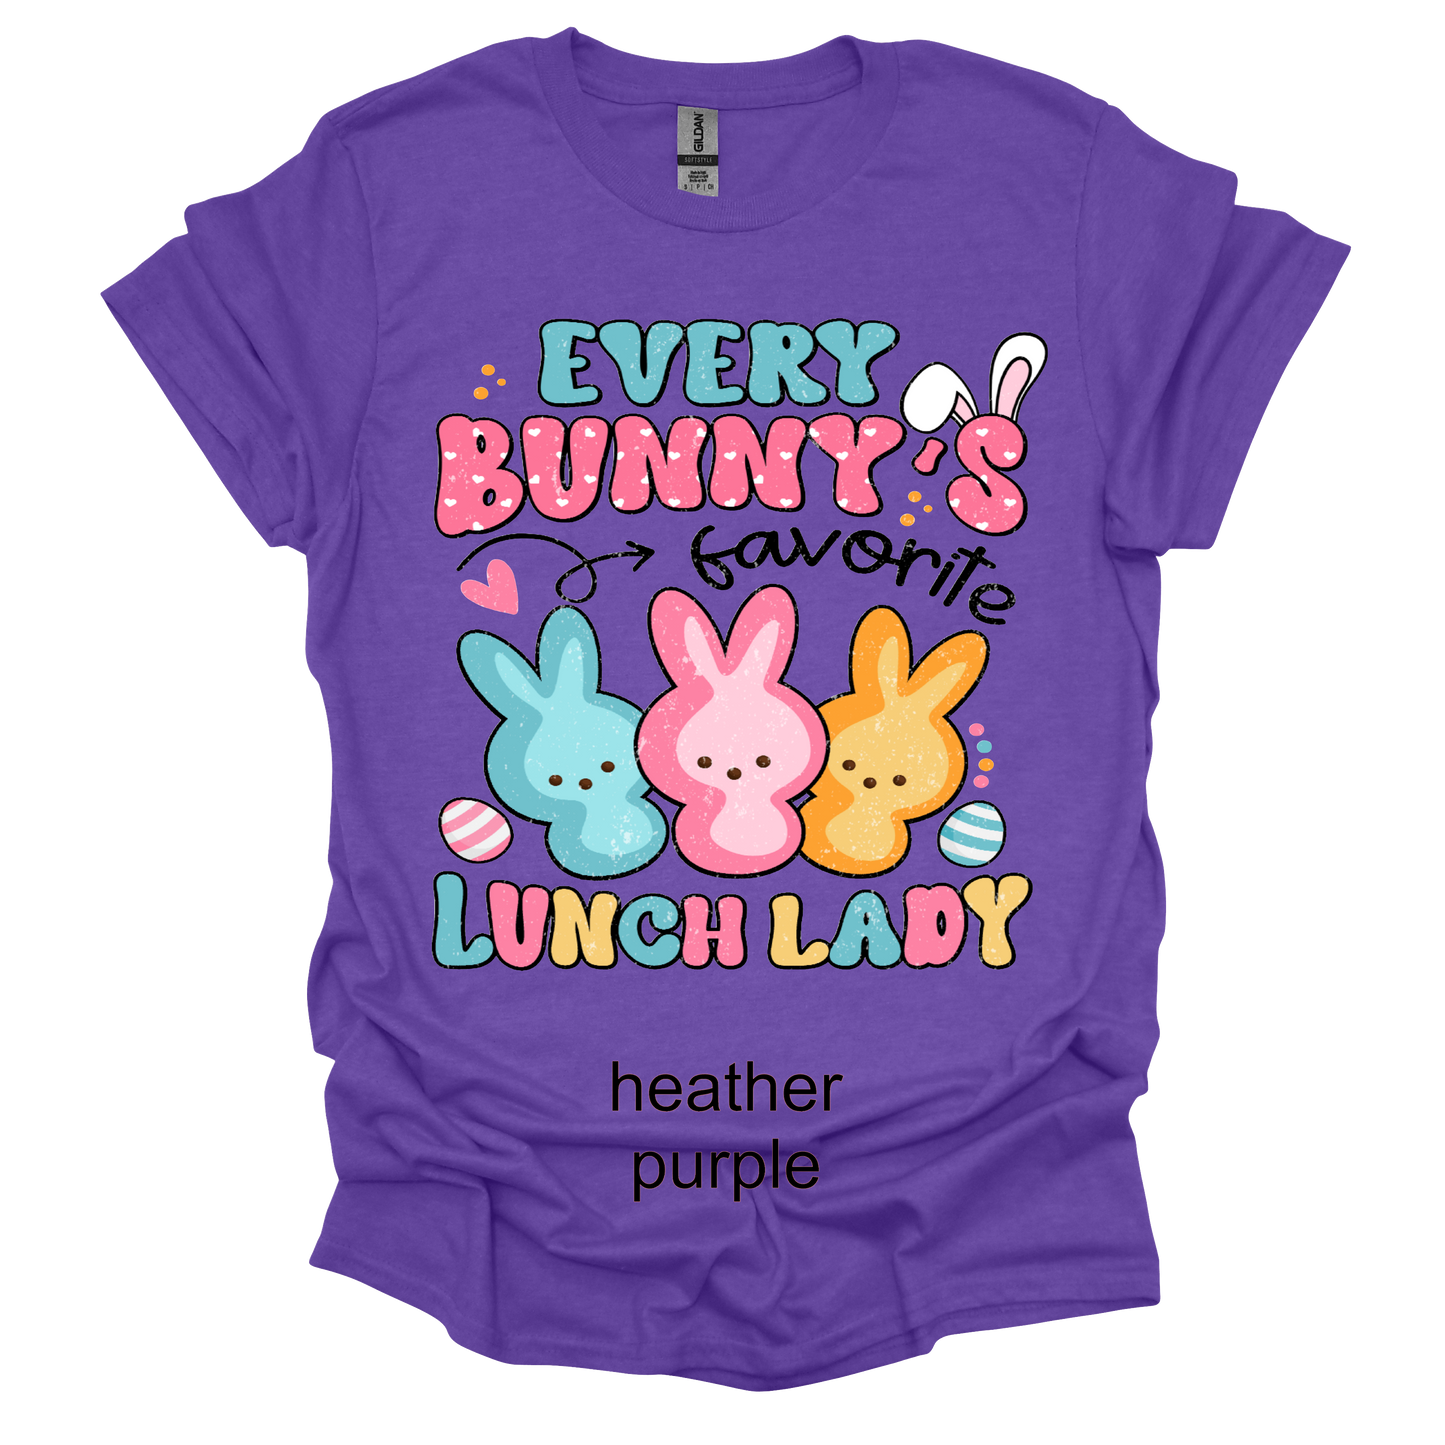 EVER BUNNY'S FAVORITE LUNCH LADY